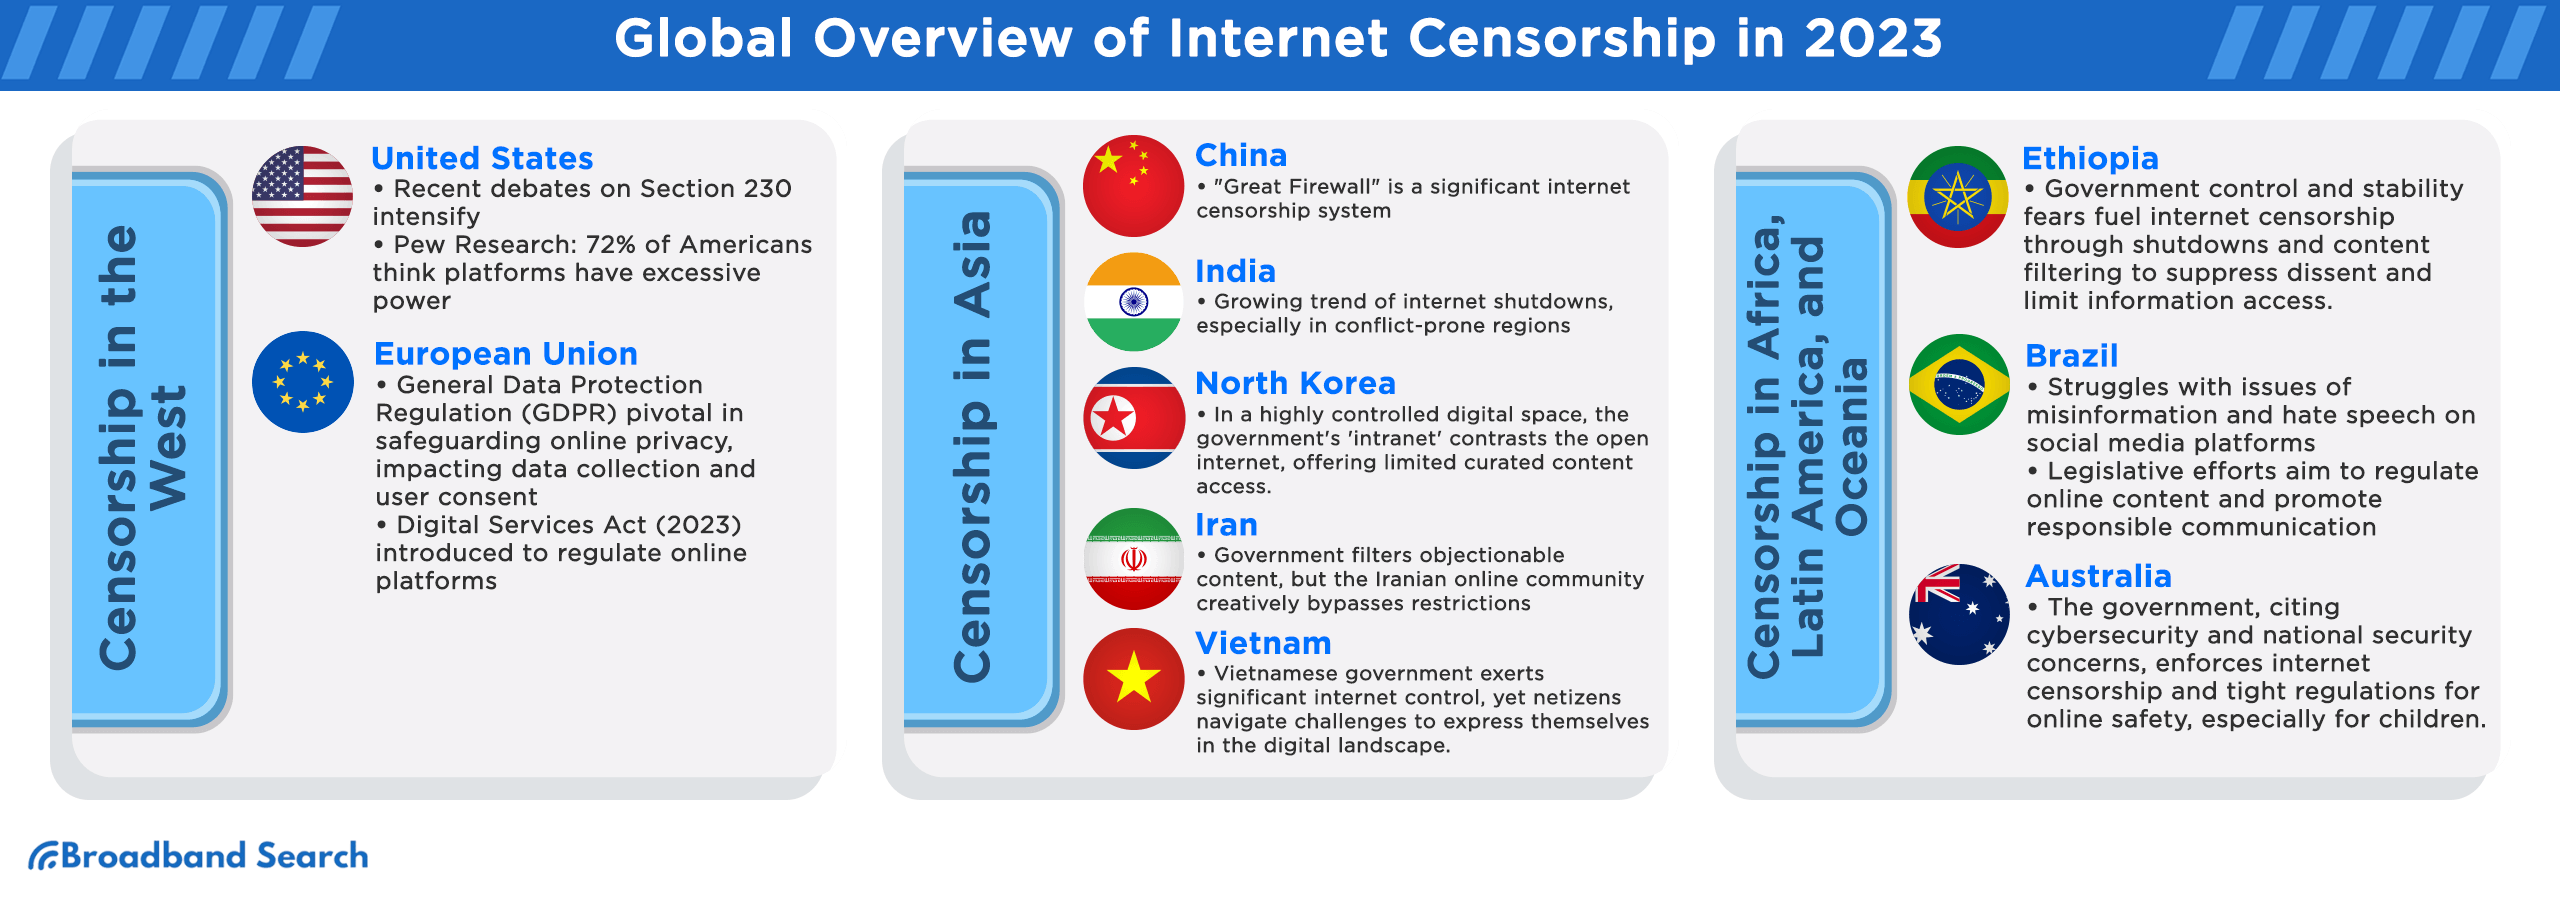 Global overview of internet censorship in 2023